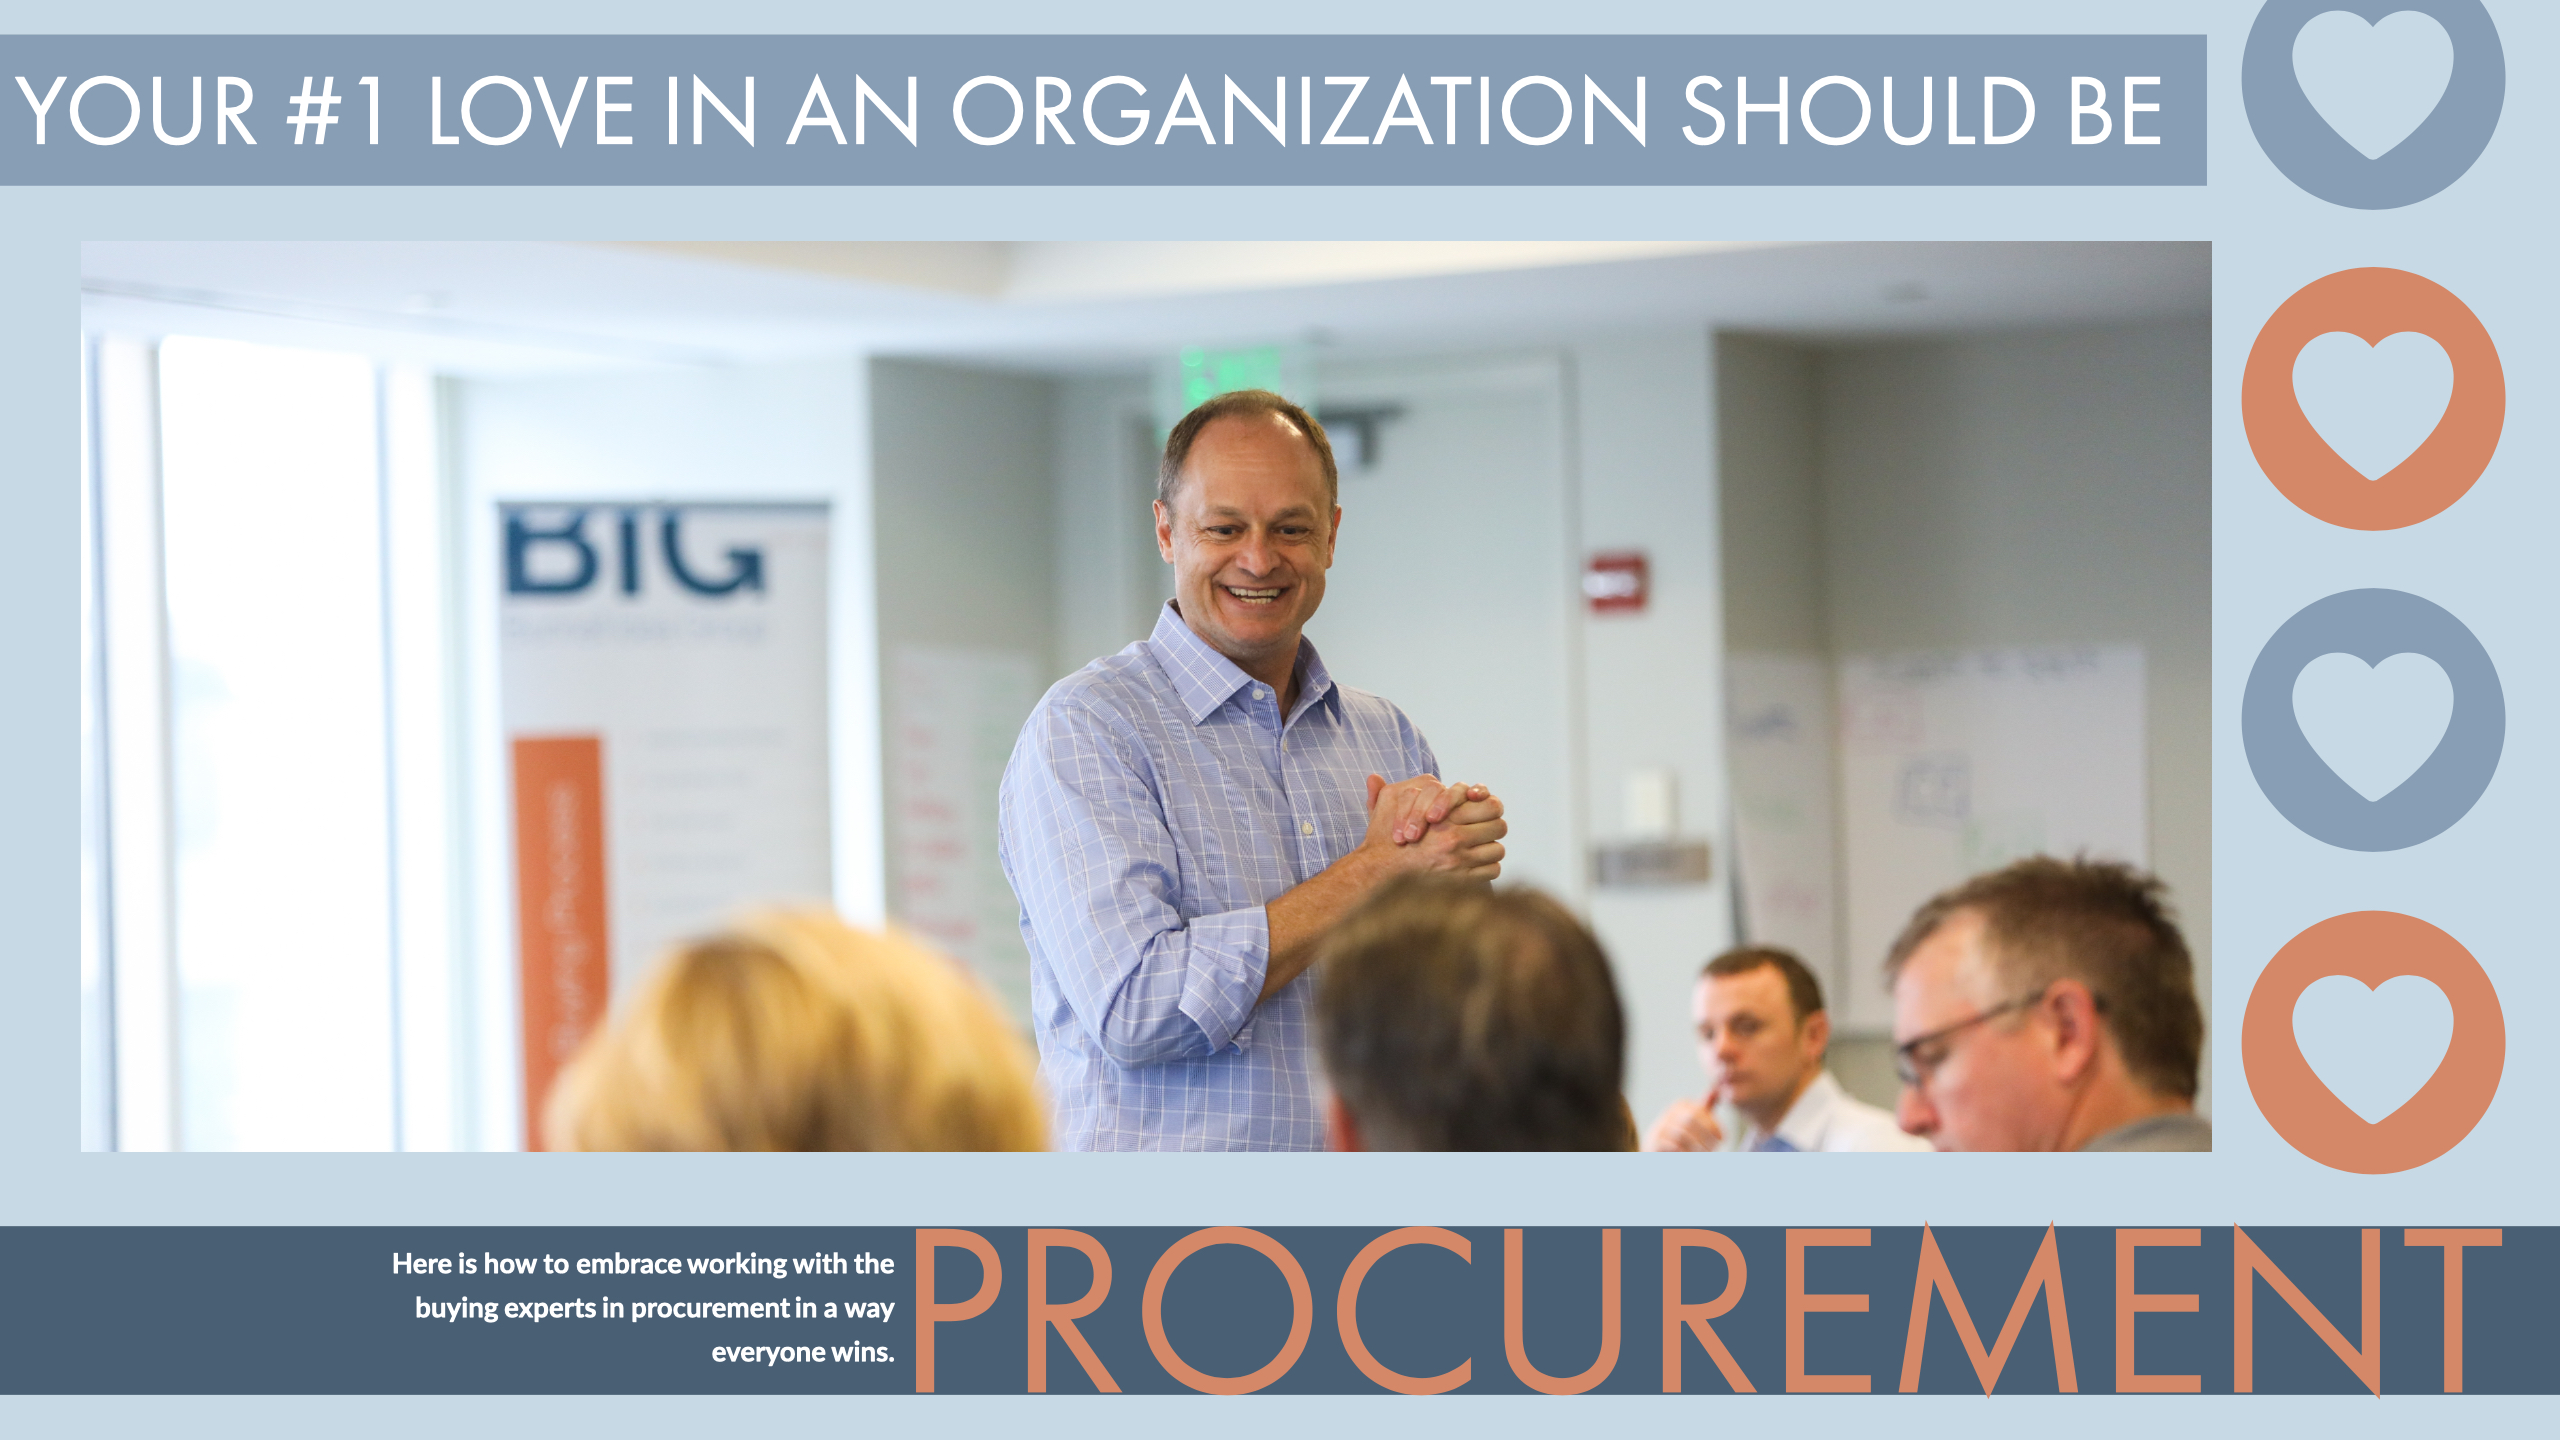 Your #1 Love in an Organization Should Be...Procurement!